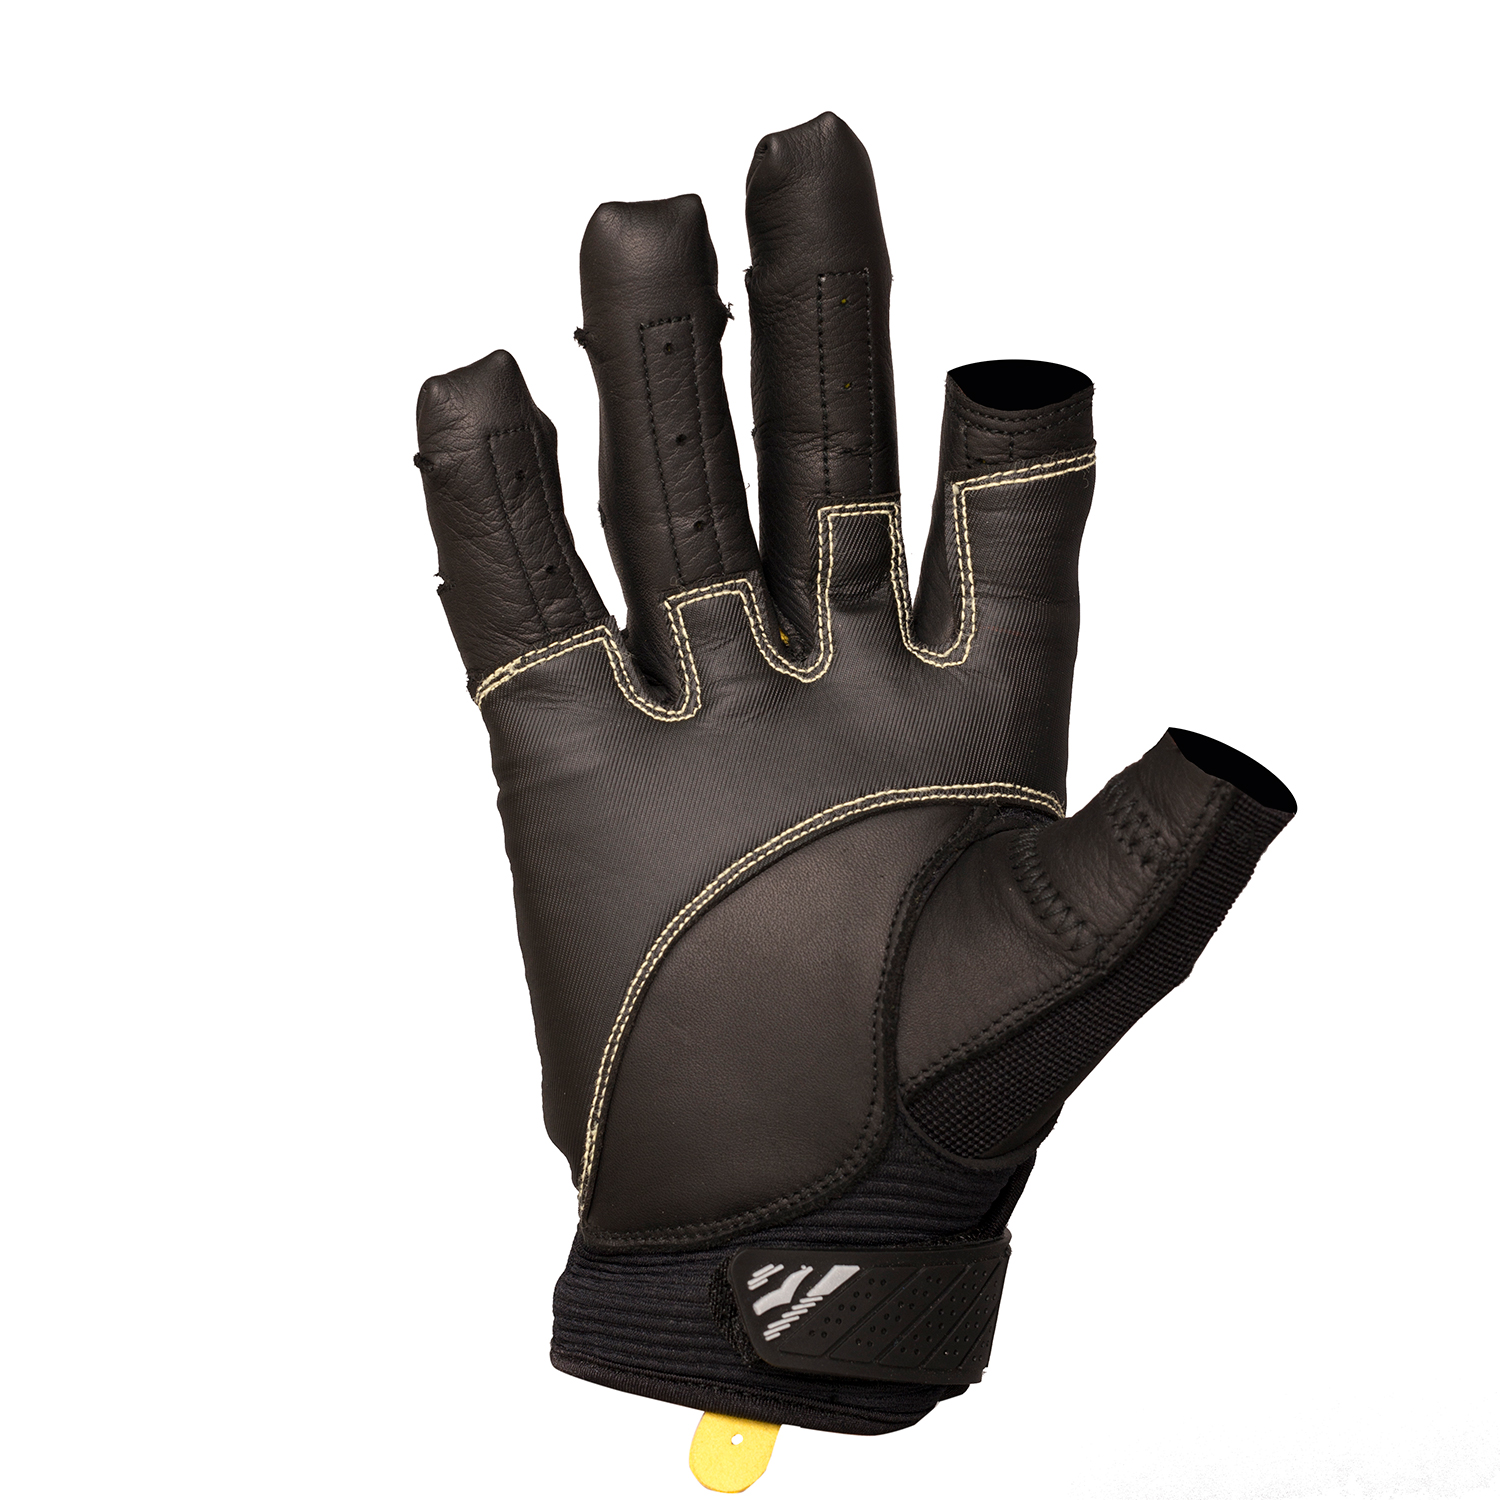 yachting gloves